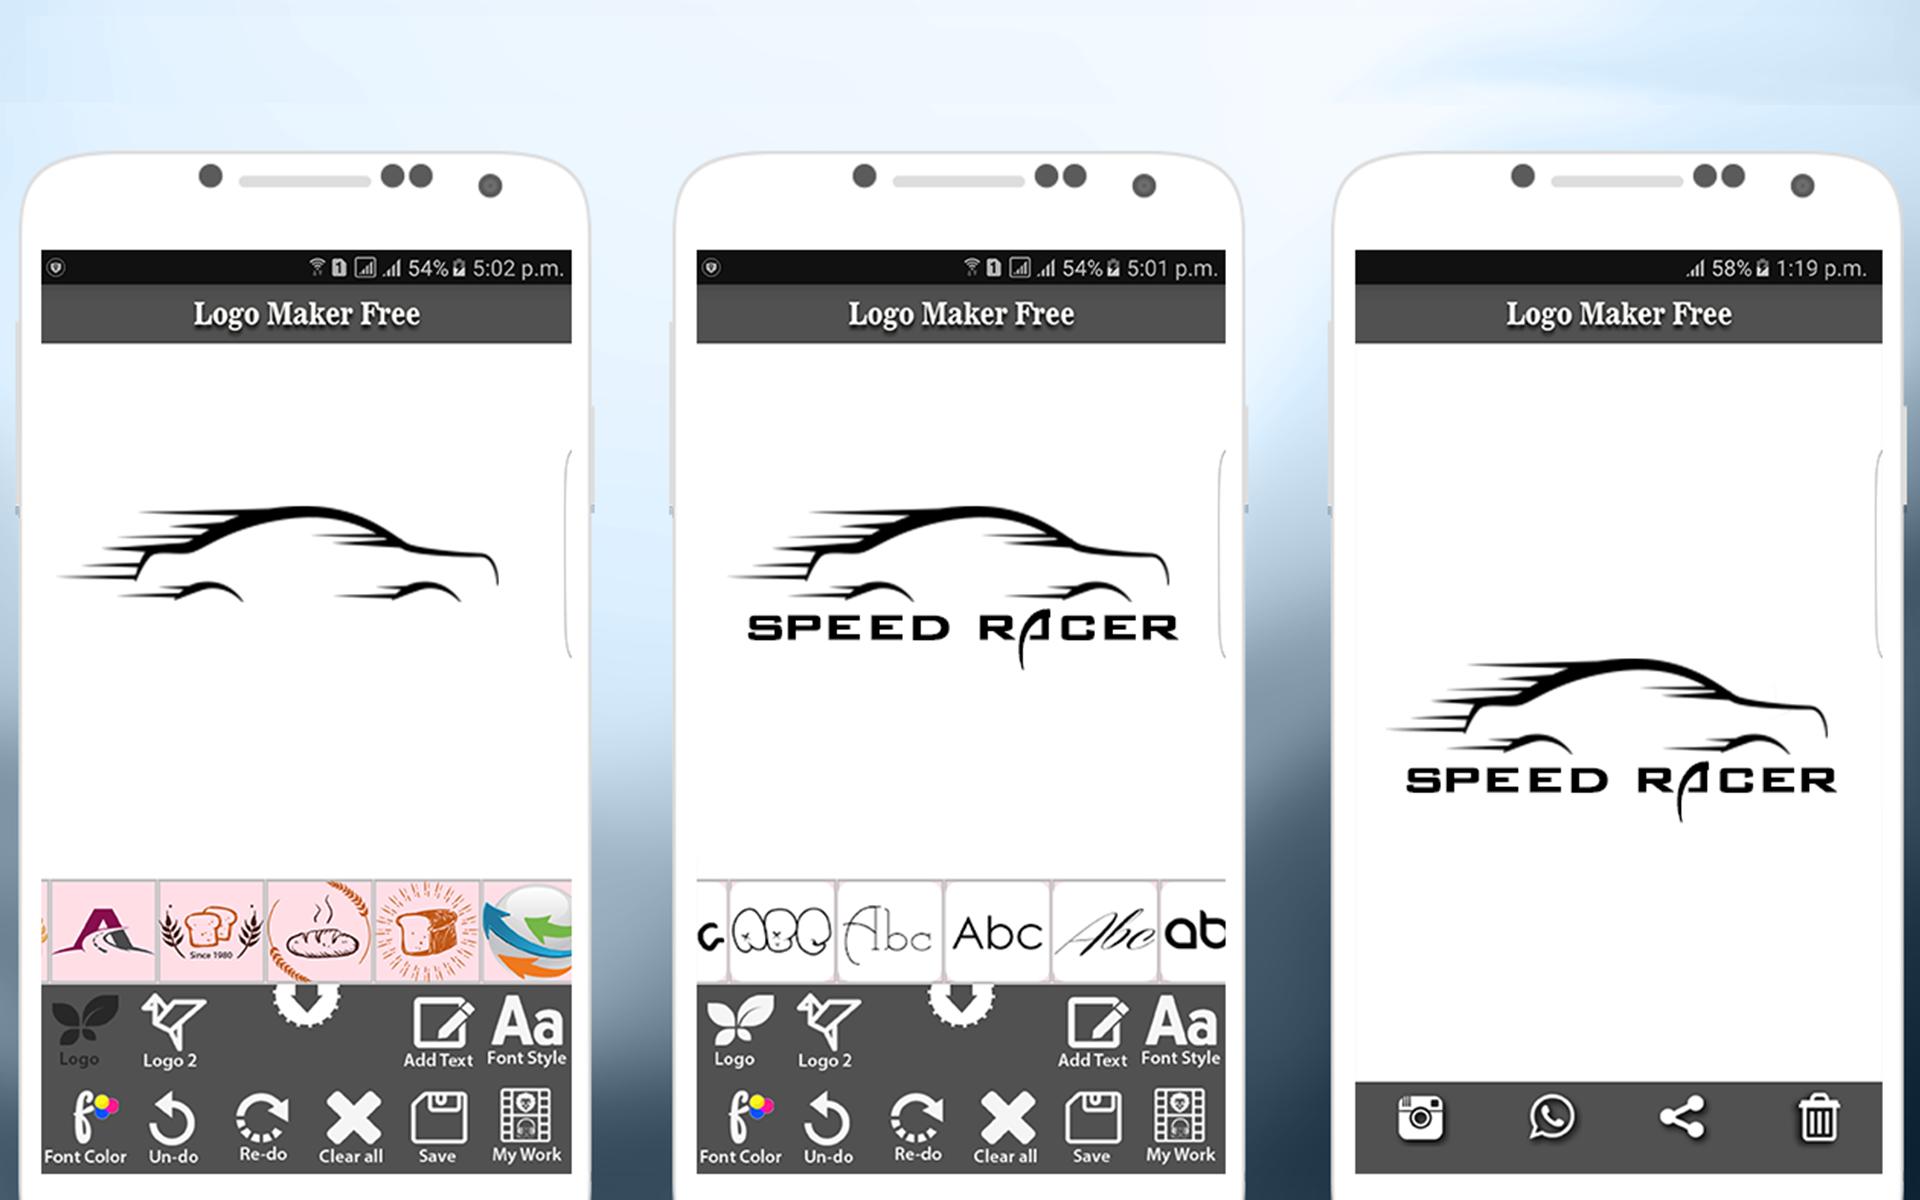 Logo Maker Free for Android - APK Download